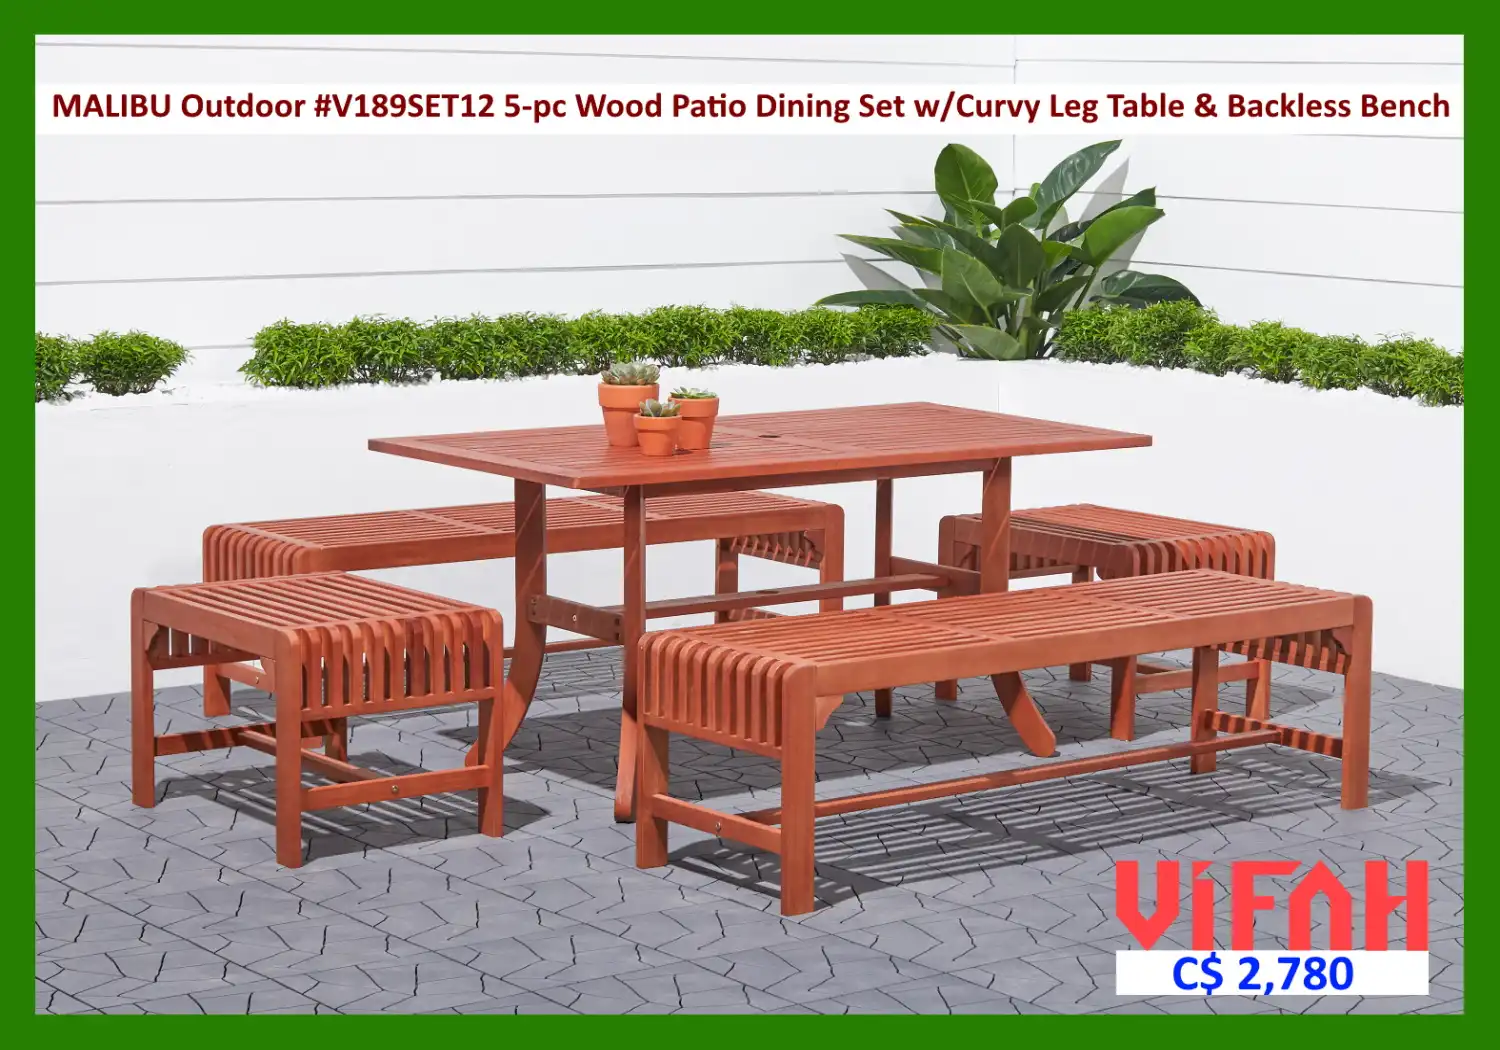 MALIBU Outdoor #V189SET12 5-piece Wood Patio Dining Set with Curvy Leg Table & Backless Bench